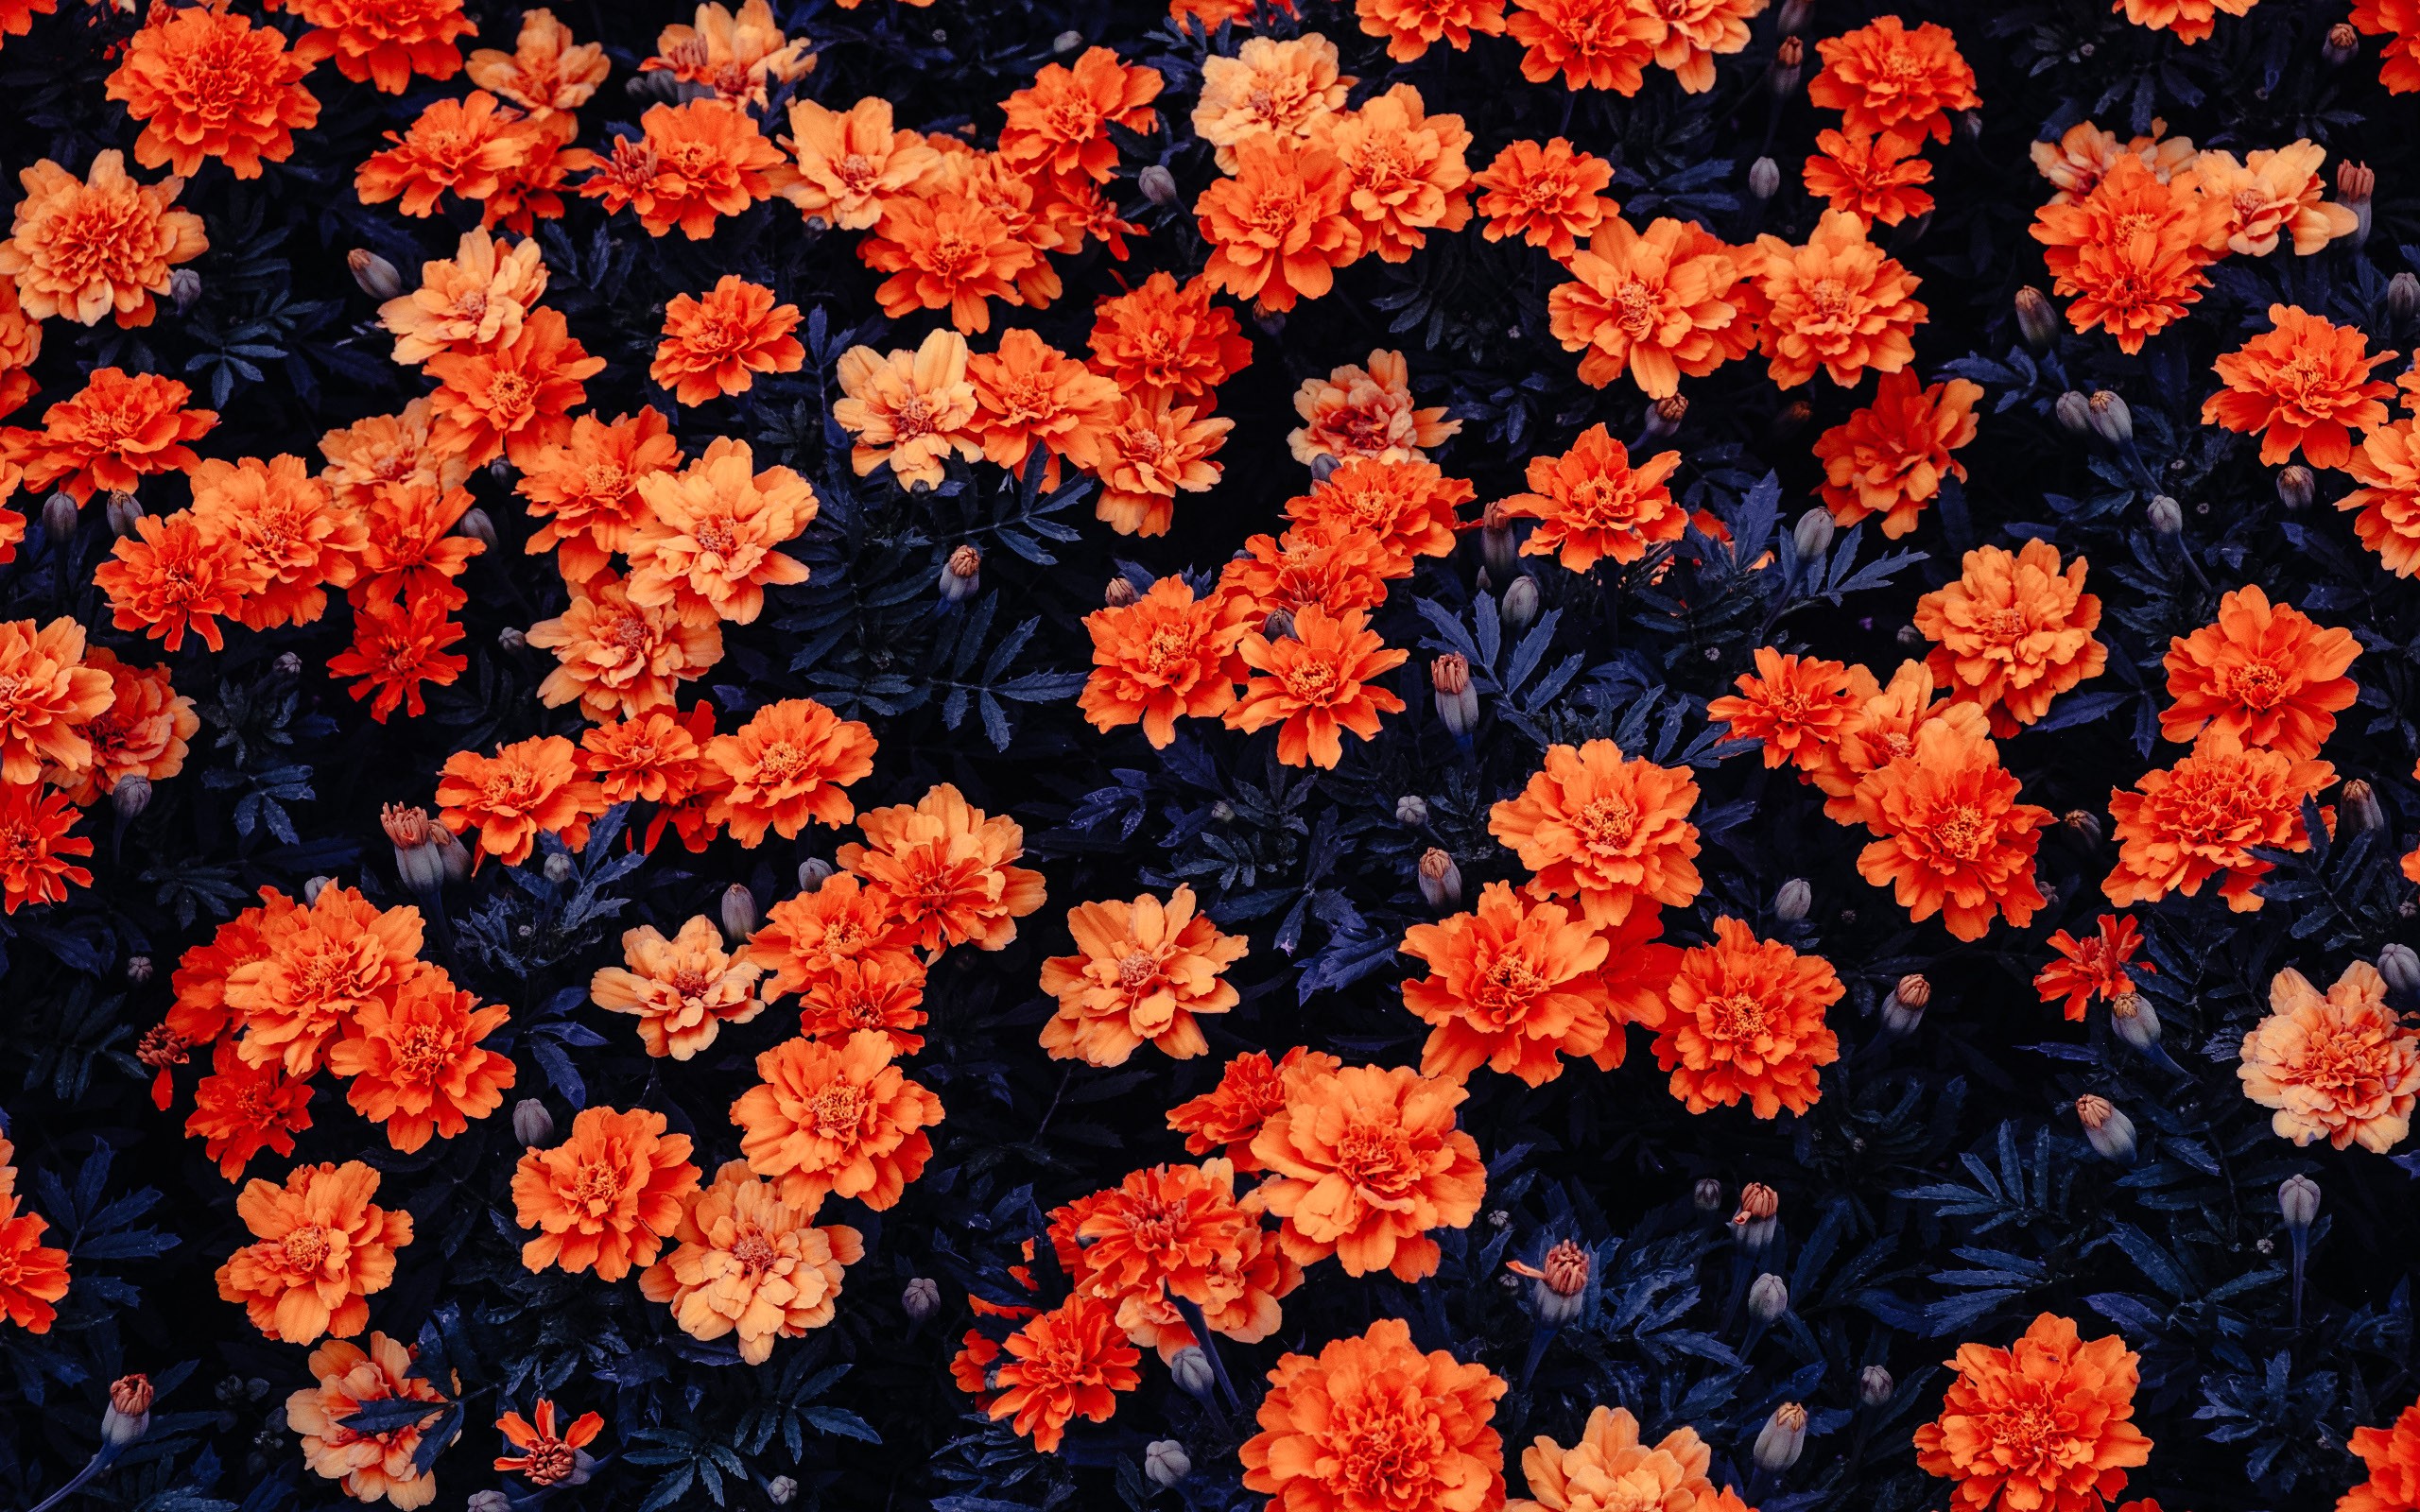 General 2560x1600 flowers top view plants orange flowers color correction nature photography red flowers